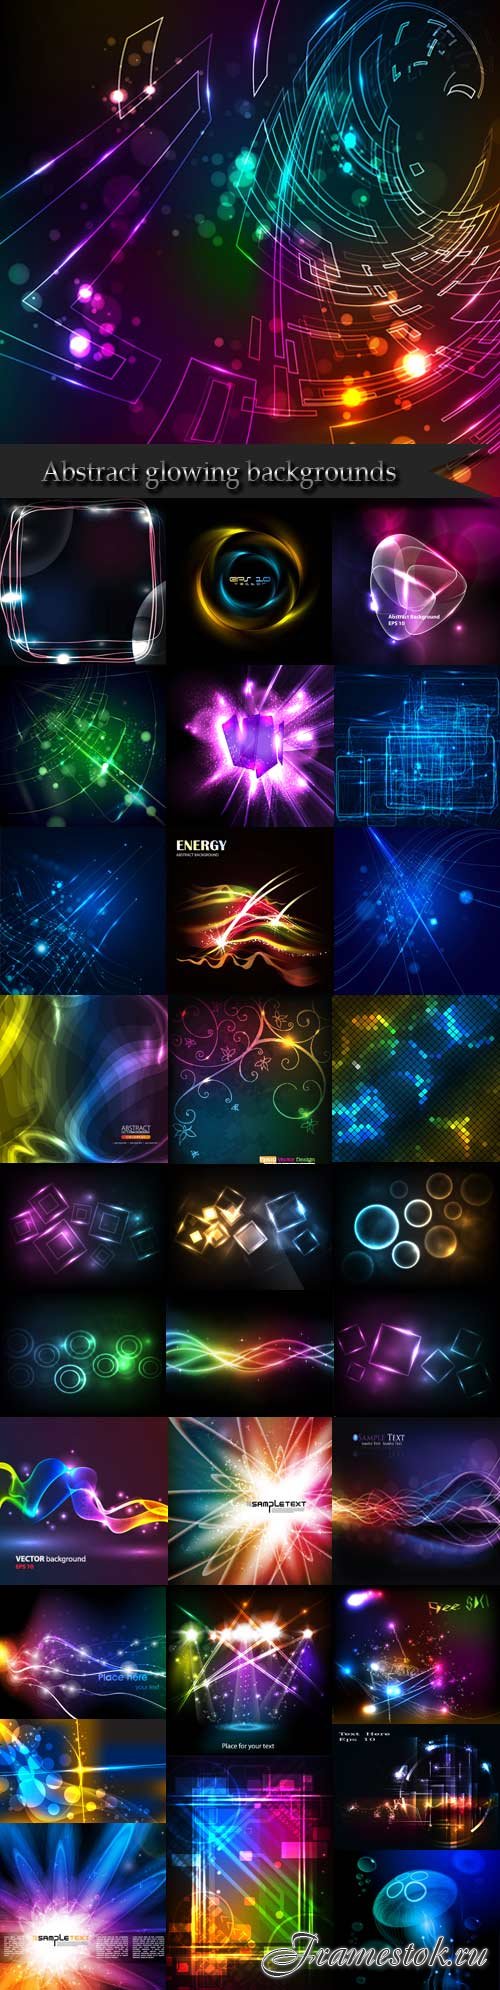 Abstract glowing backgrounds